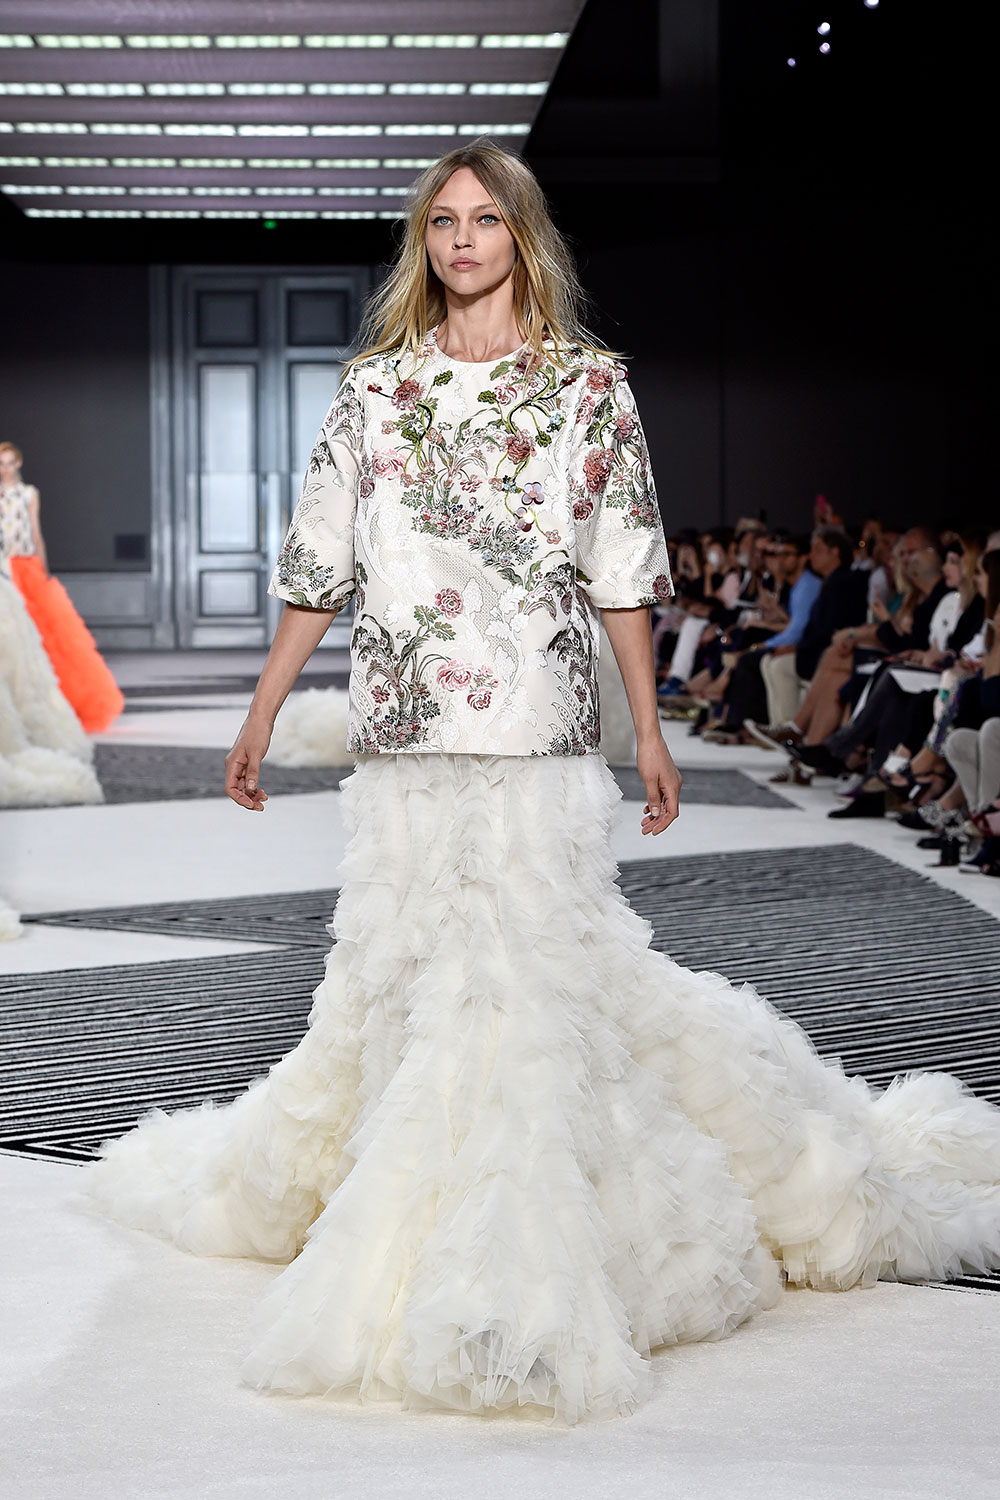 Look 50 from the Giambattista Valli show at Paris Fashion Week Haute Couture FW 2015/2016. Photo / Getty Images